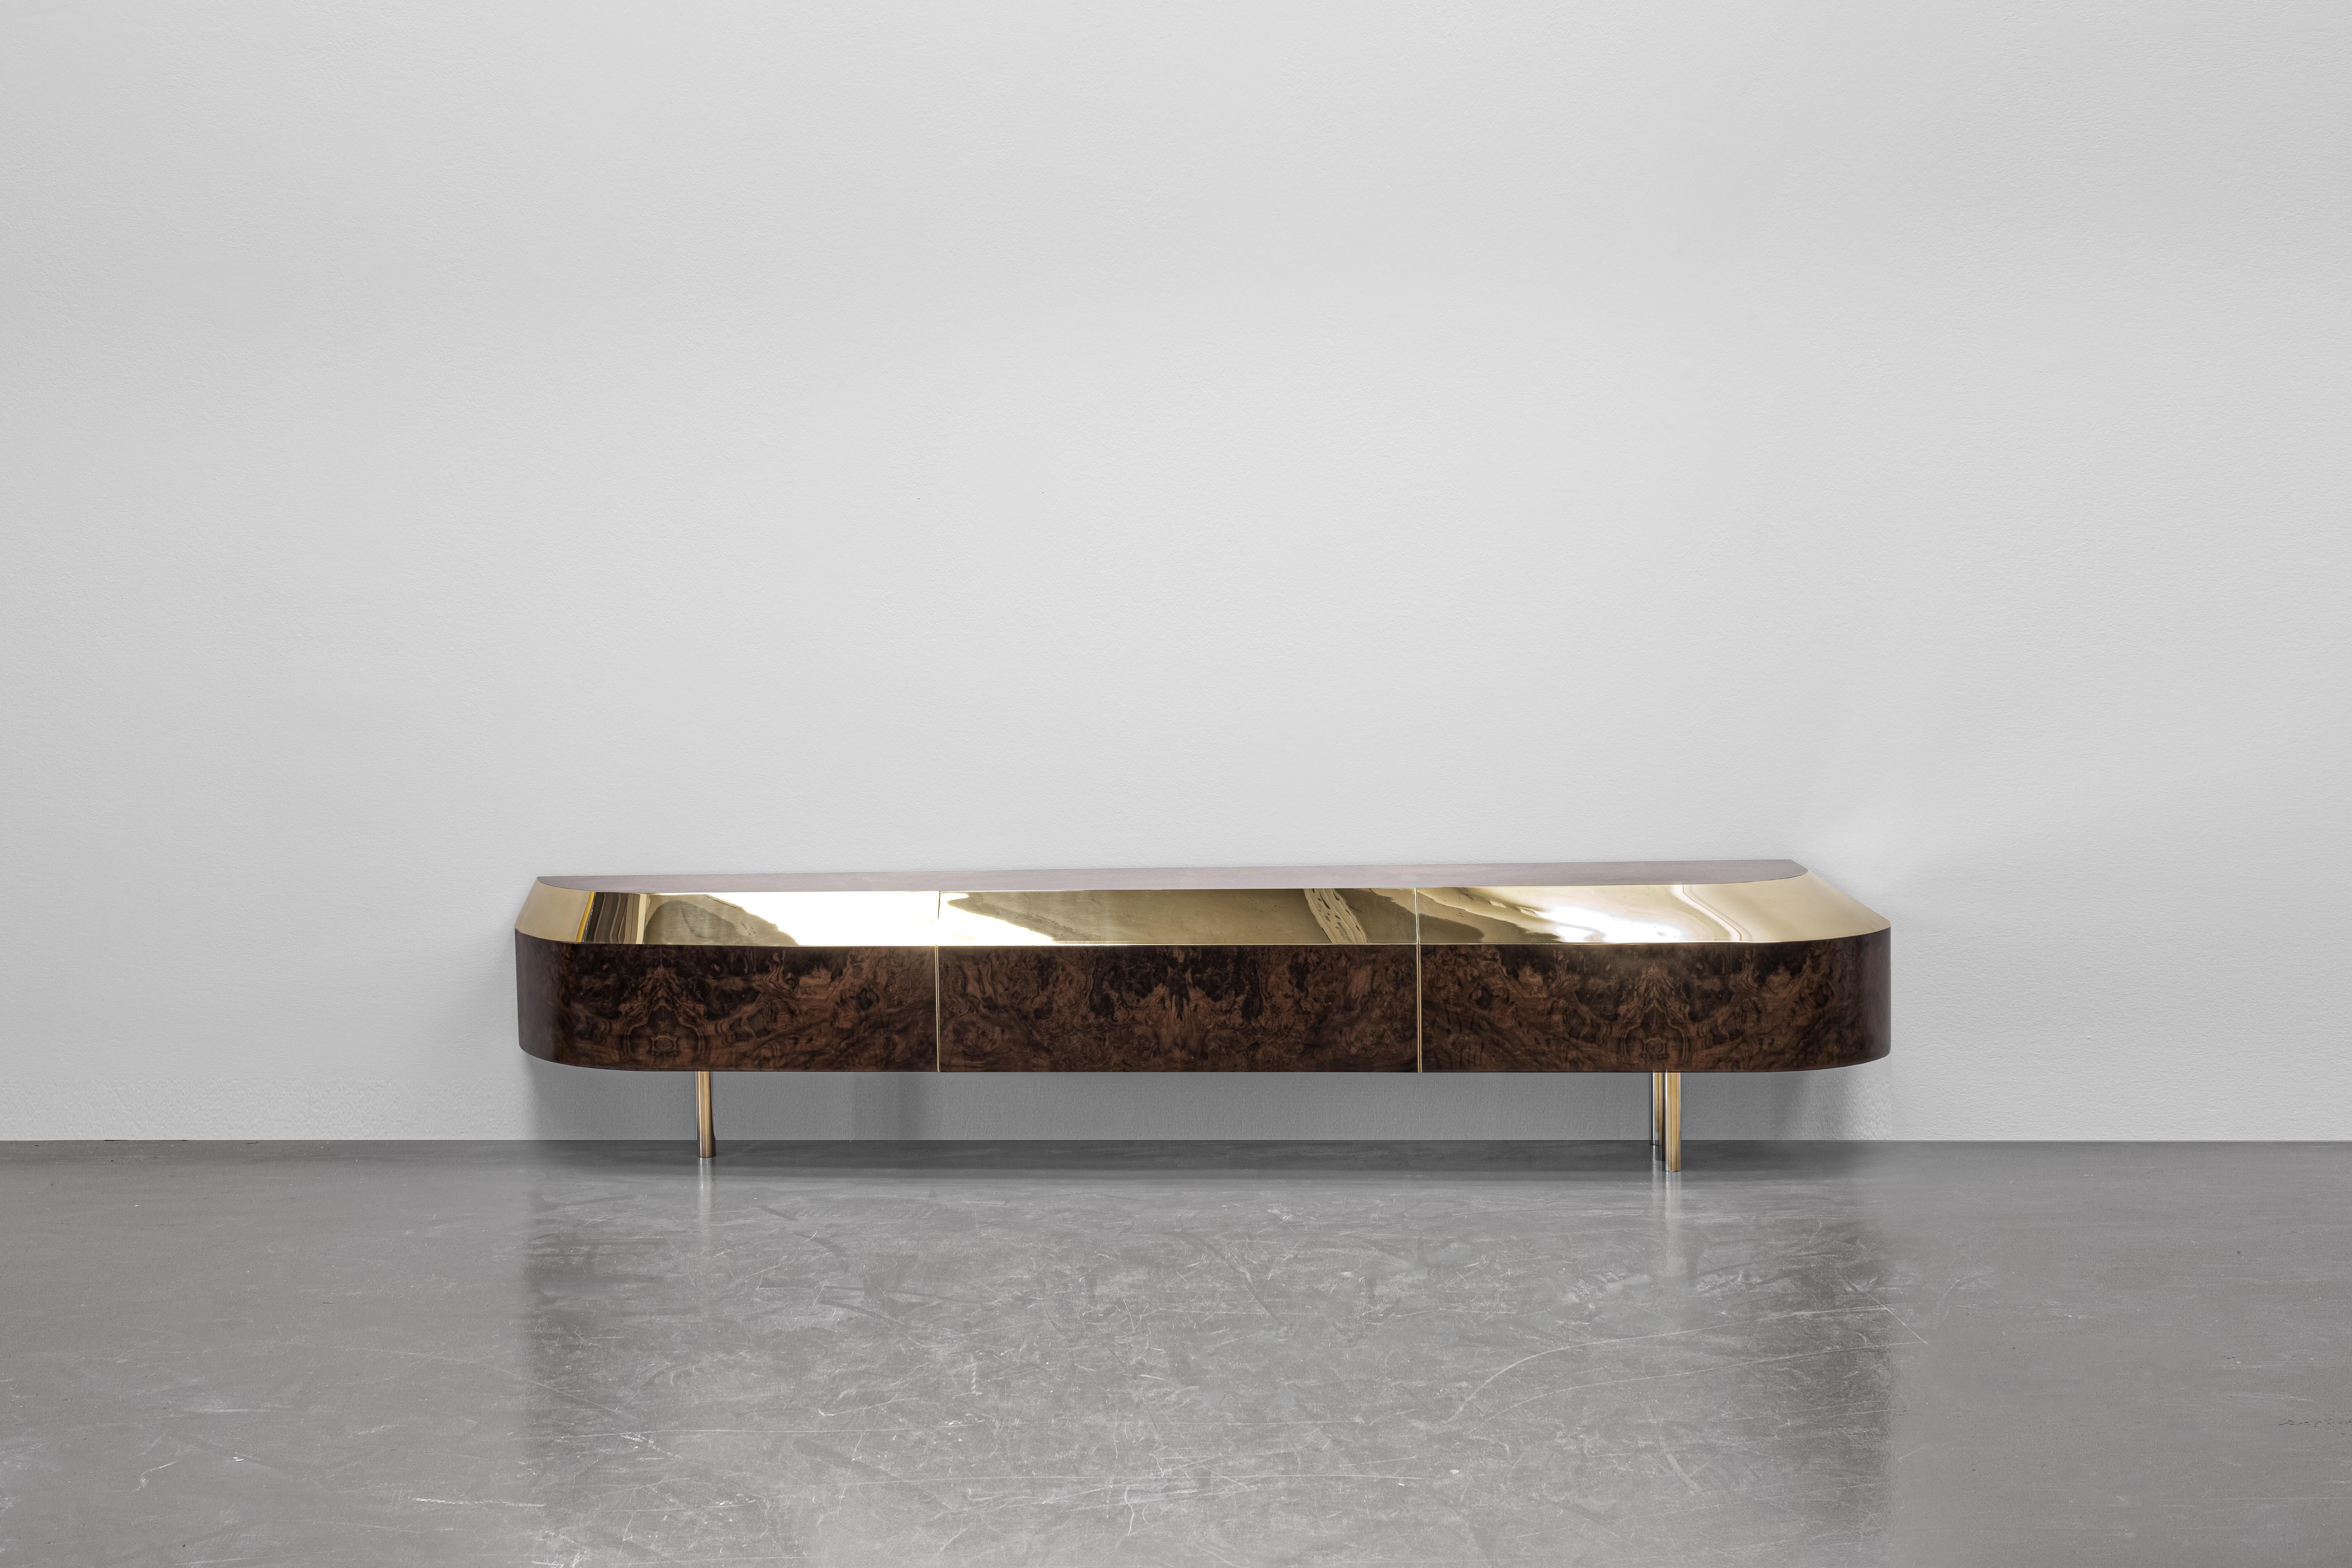 Distortion Series Object 5 Polished Brass Console by Emelianova Studio
Distortion Series Vol 1 
Limited Edition of 20 
Signed and numbered
Dimensions: 210 × 45 × 40 cm
Materials: Polished Brass, Briar Wood
Handmade 




Distortion series is a bold